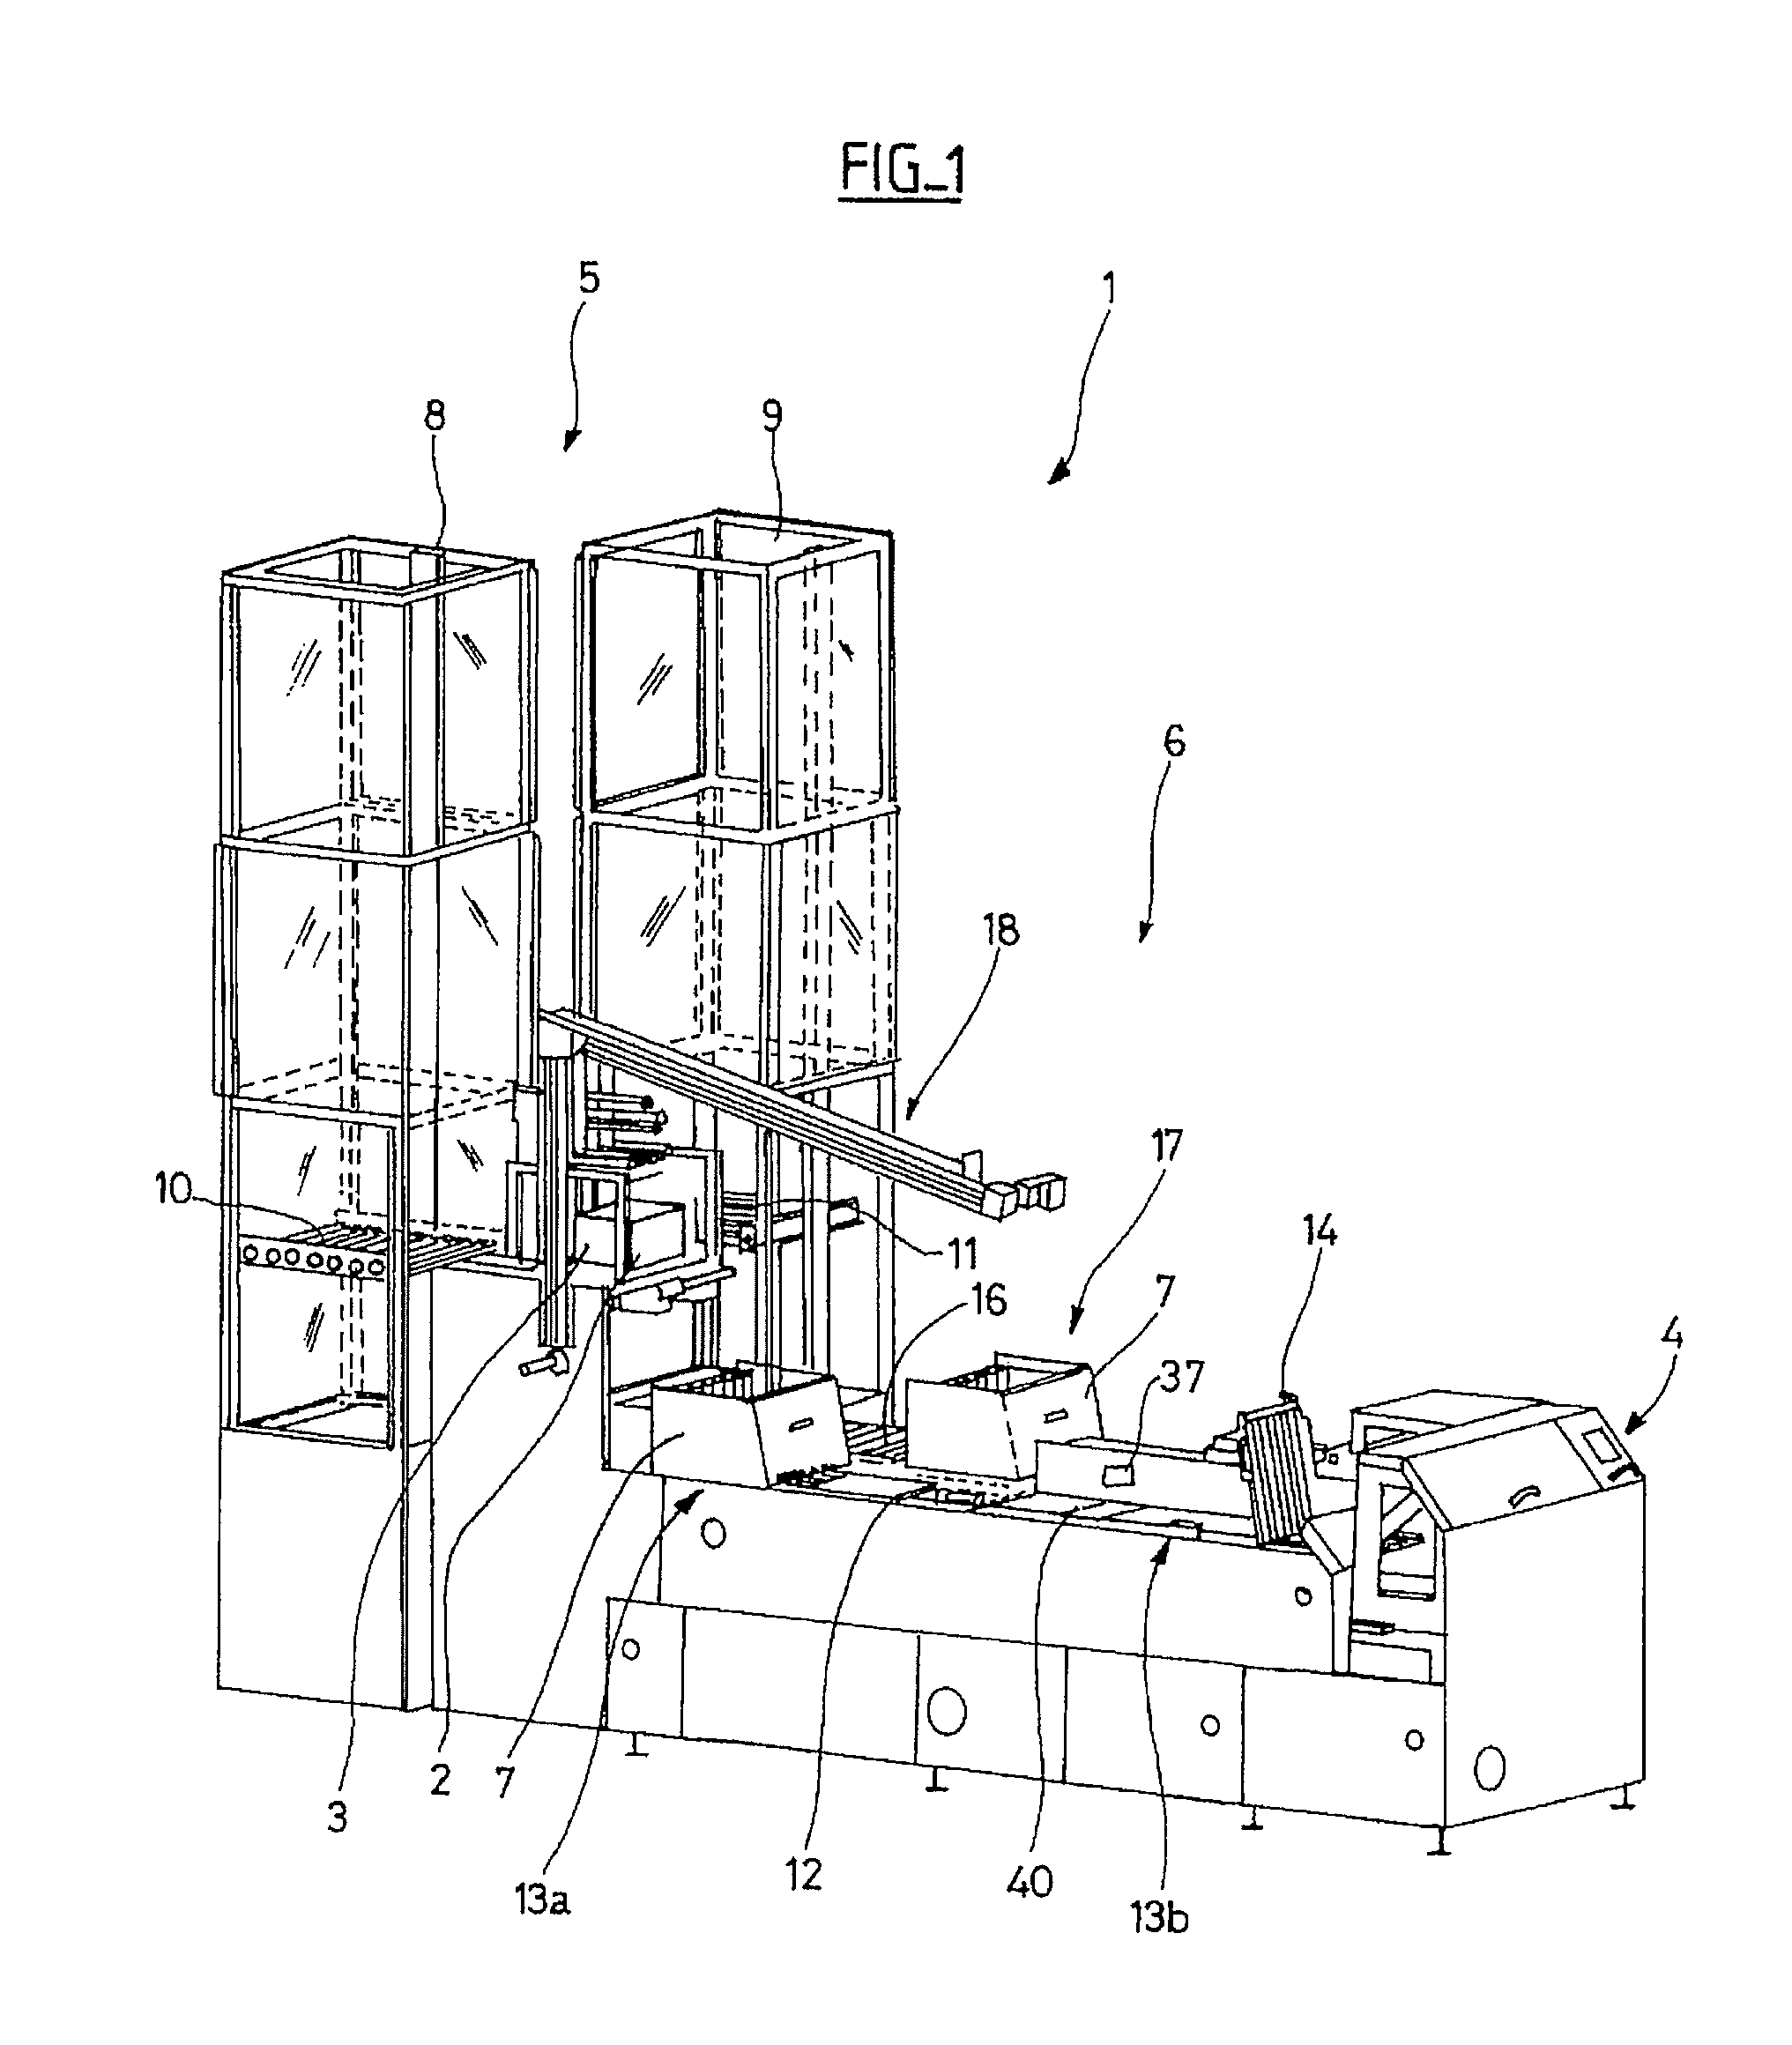 Device for unloading trays using a pivot member